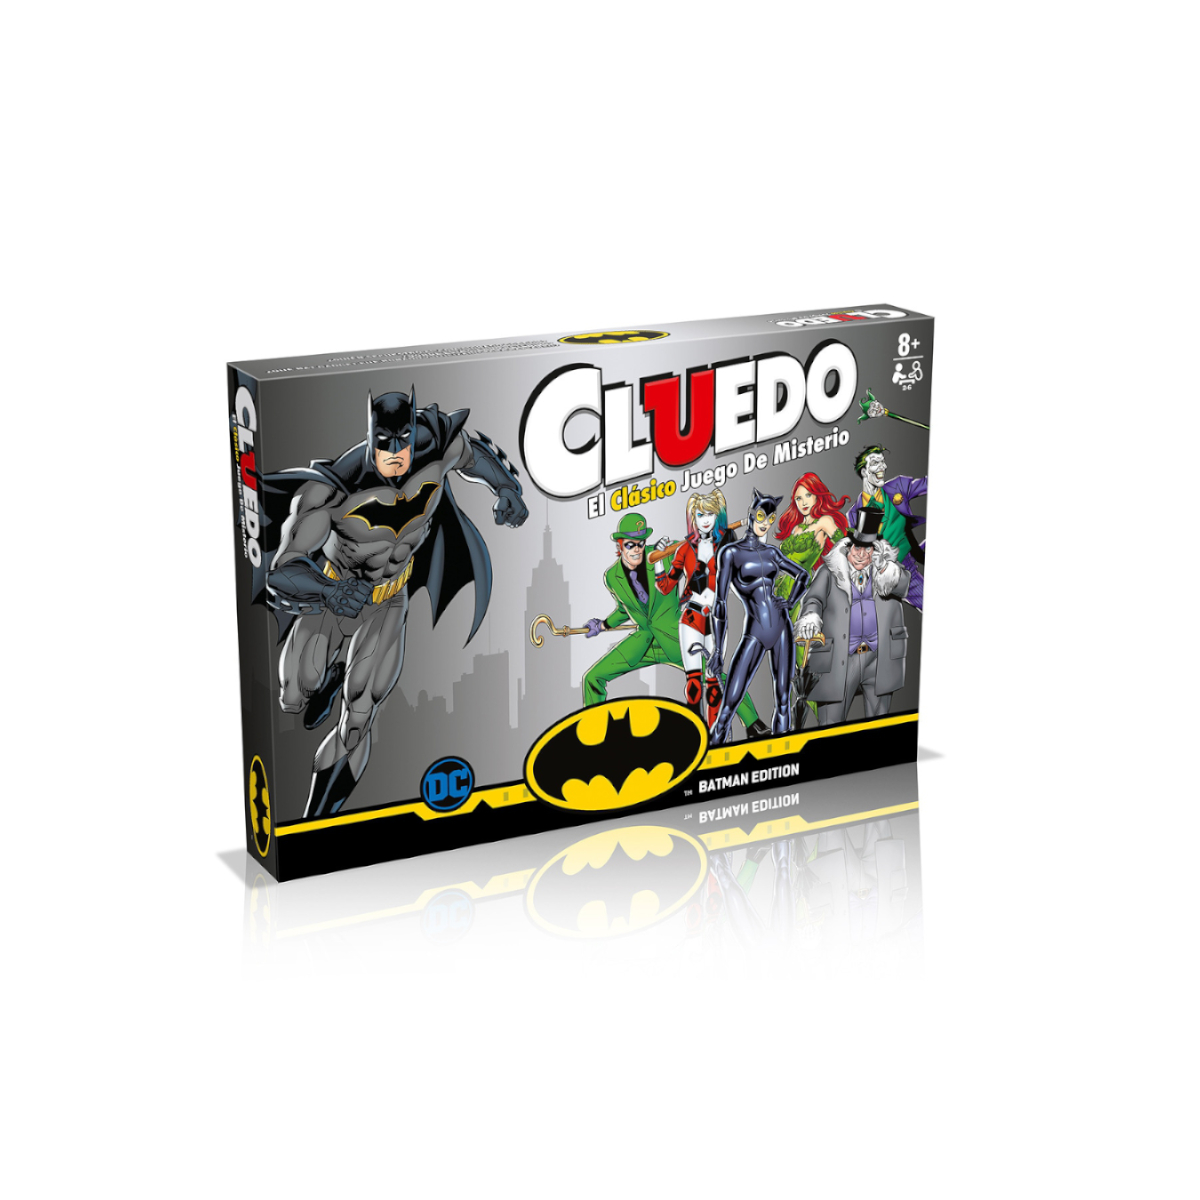 Batman - Cluedo | Funko Universe, Planet of comics, games and collecting.